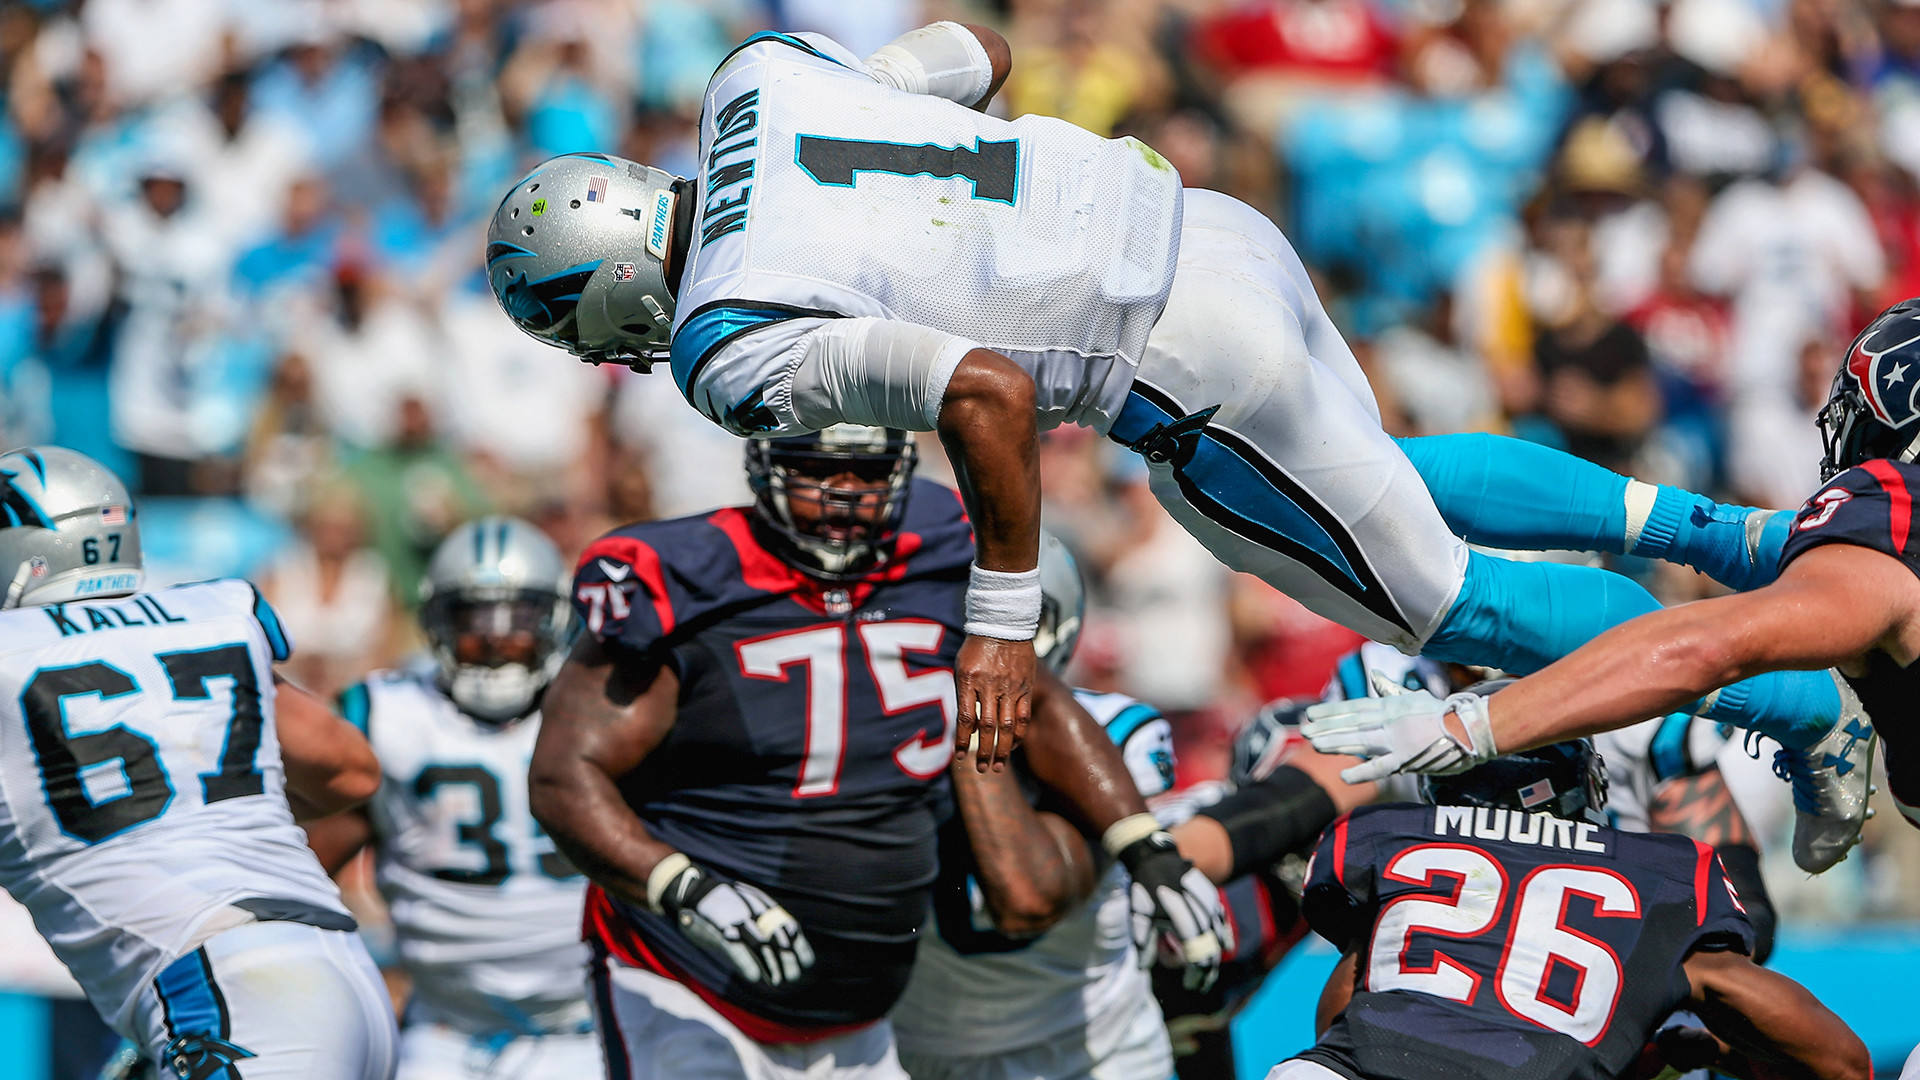 1920x1080 Cam Newton goes Superman, flips over defender and into the end zone